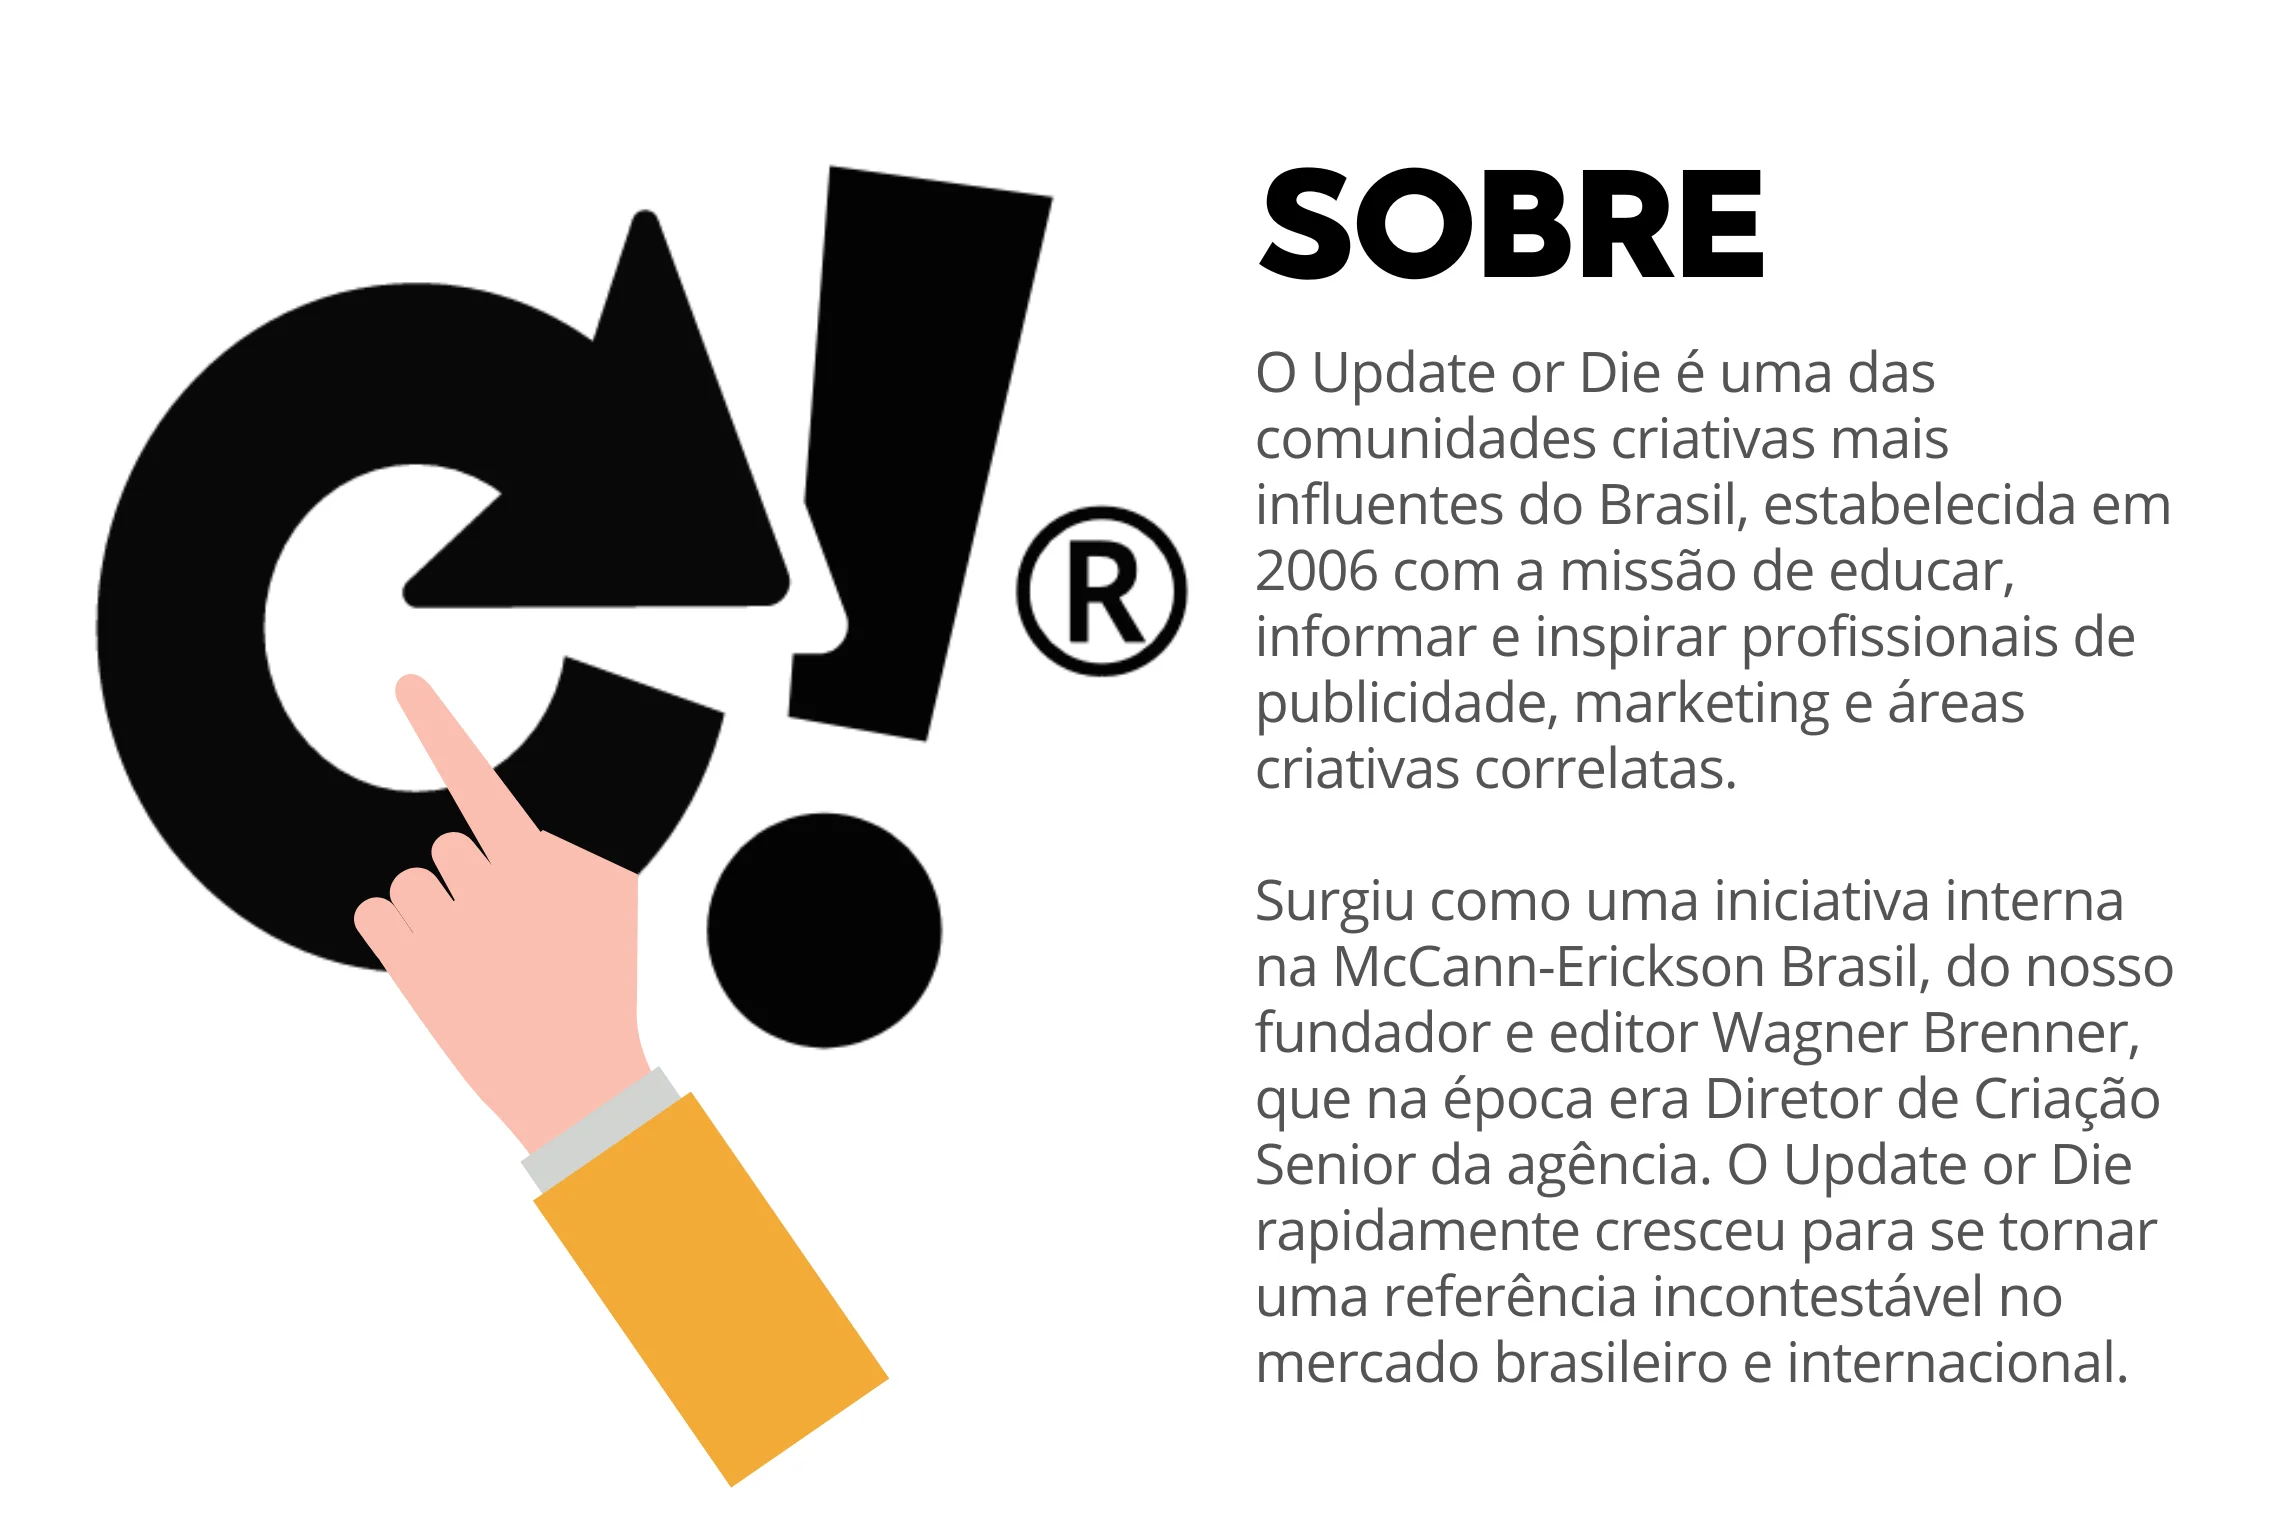 Hand pointing to stylized "Update or Die" logo with Portuguese text about creative community in Brazil.